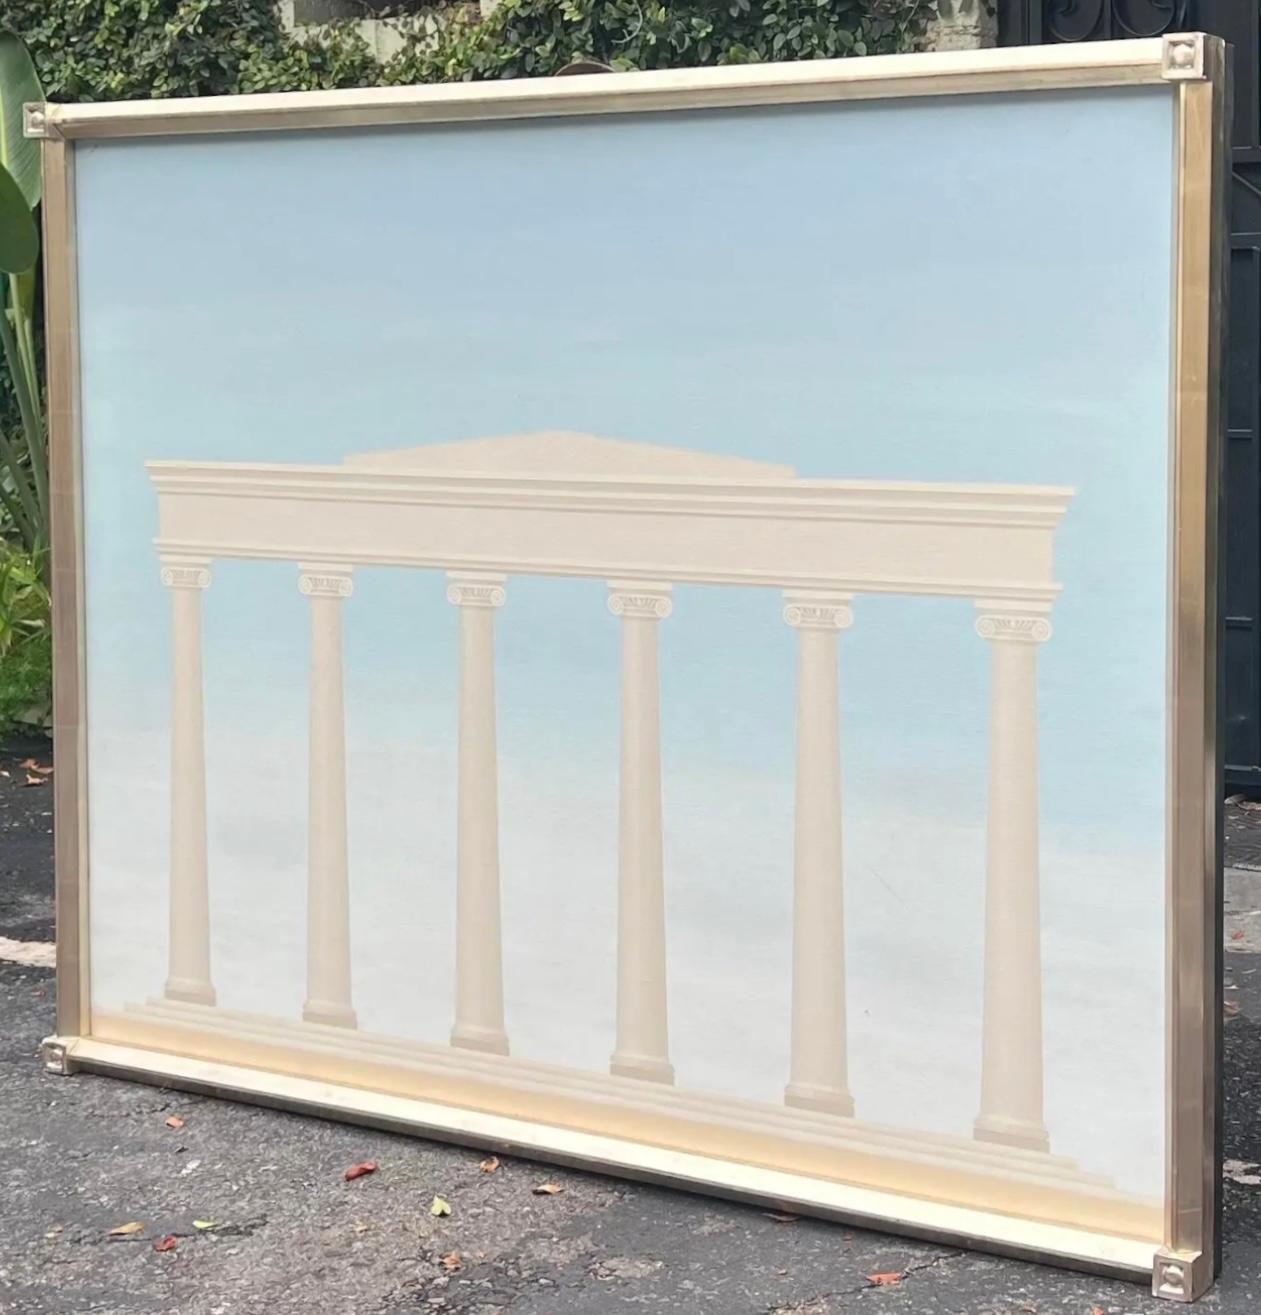 Tony Evans Architectural Neoclassical Oil Painting in Jerry Solomon Frame.